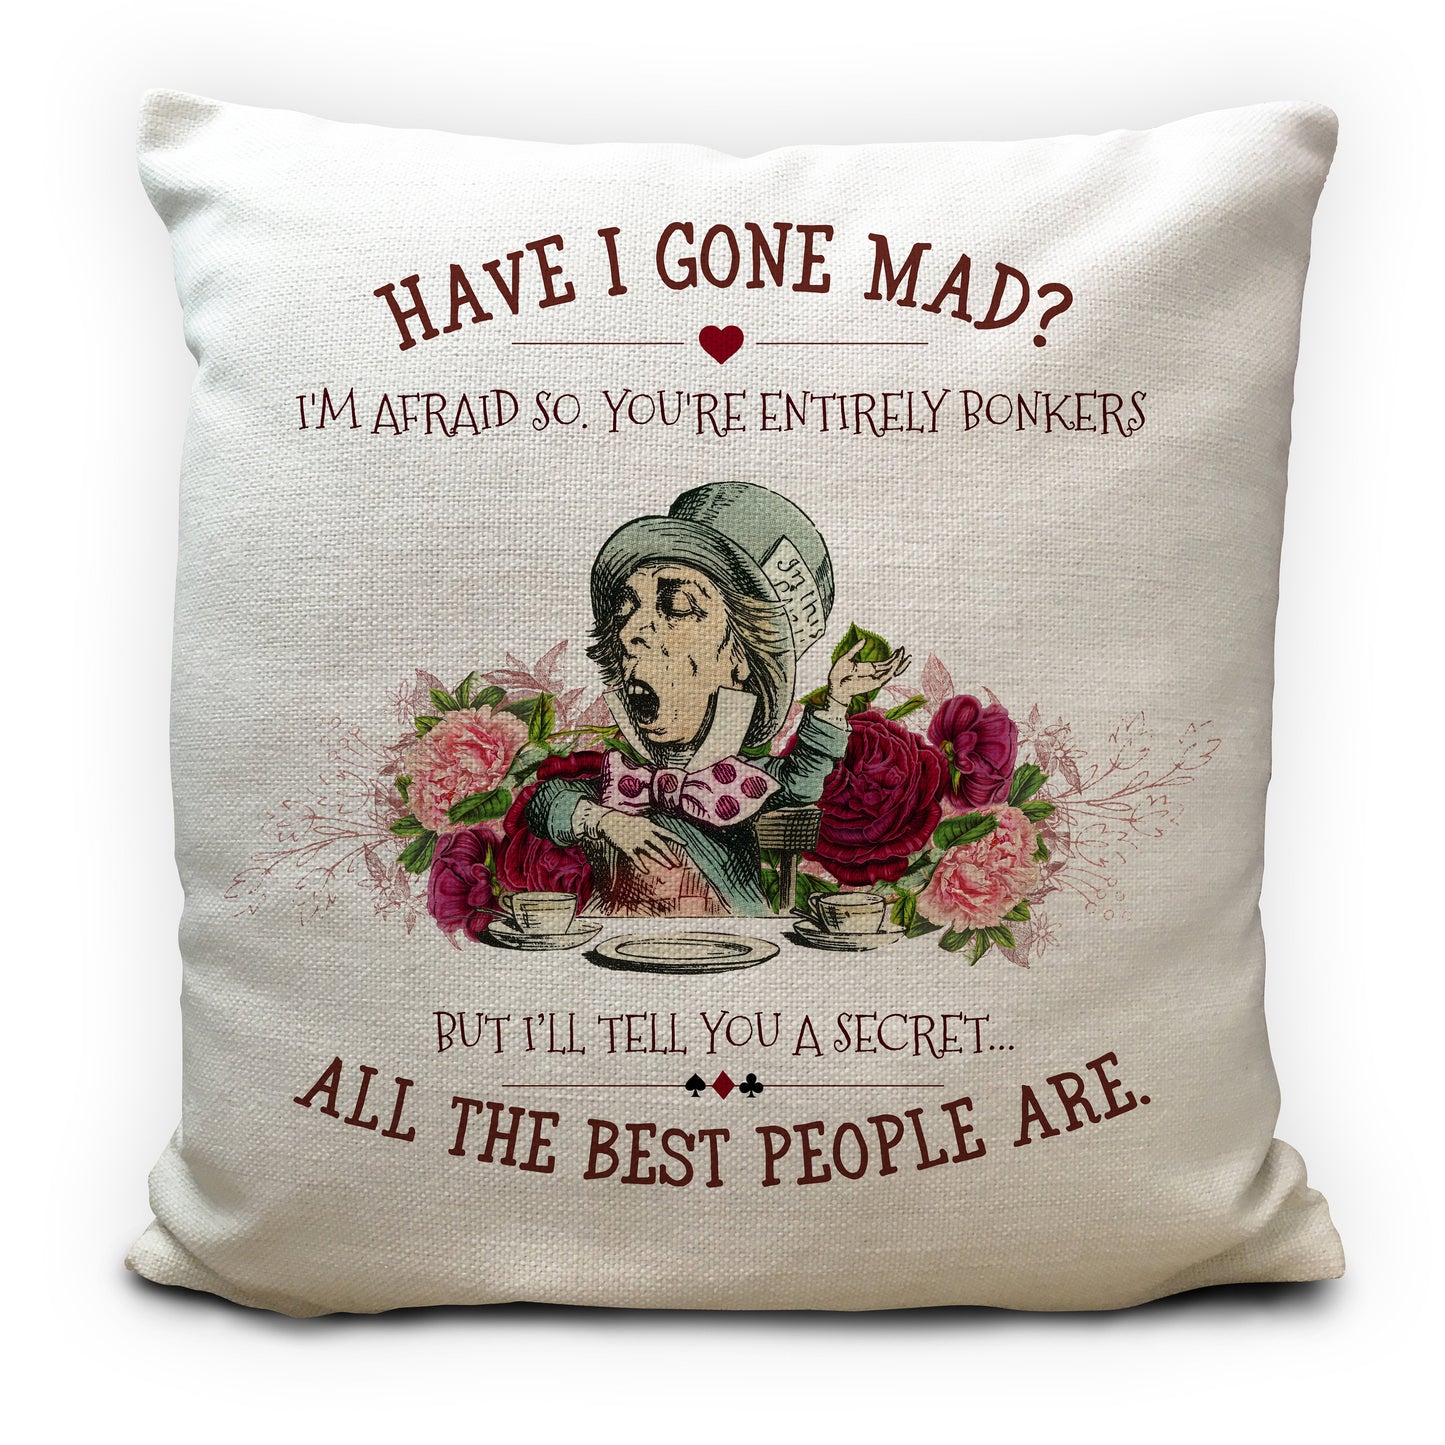 Alice in wonderland cushion cover with mad hatter illustration and have I gone mad quote